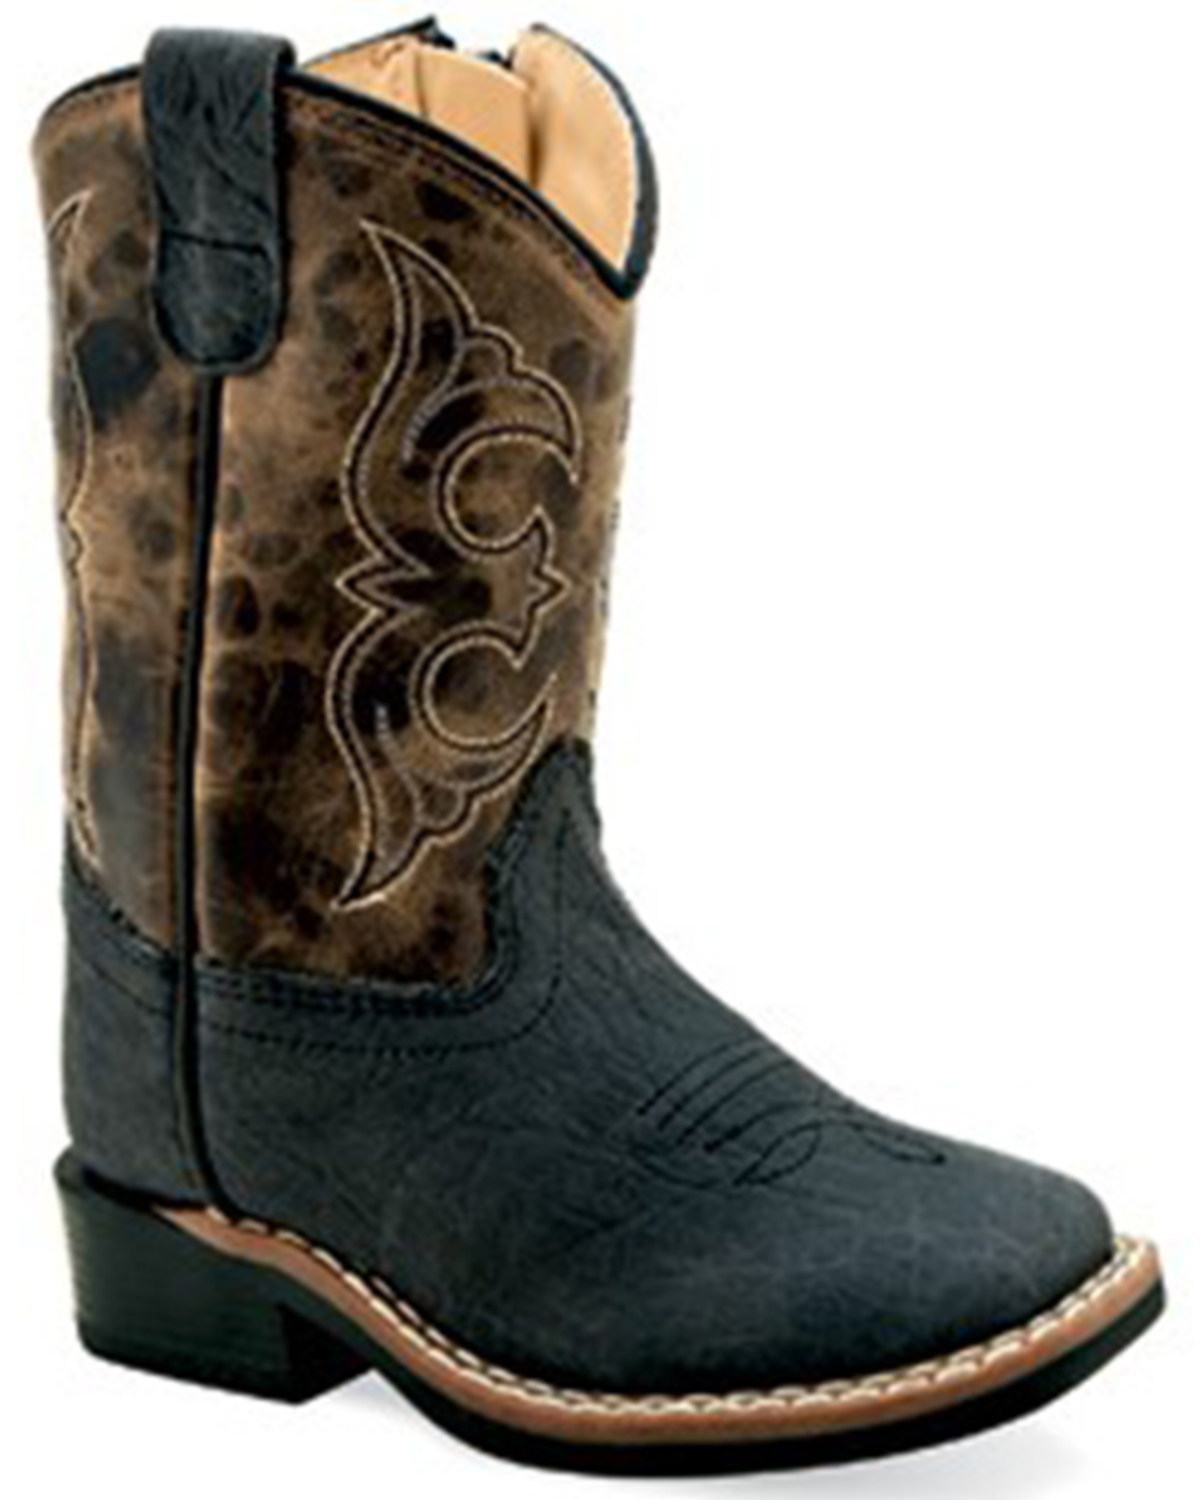 Old West Toddler Boys' Bull Hide Print Western Boots